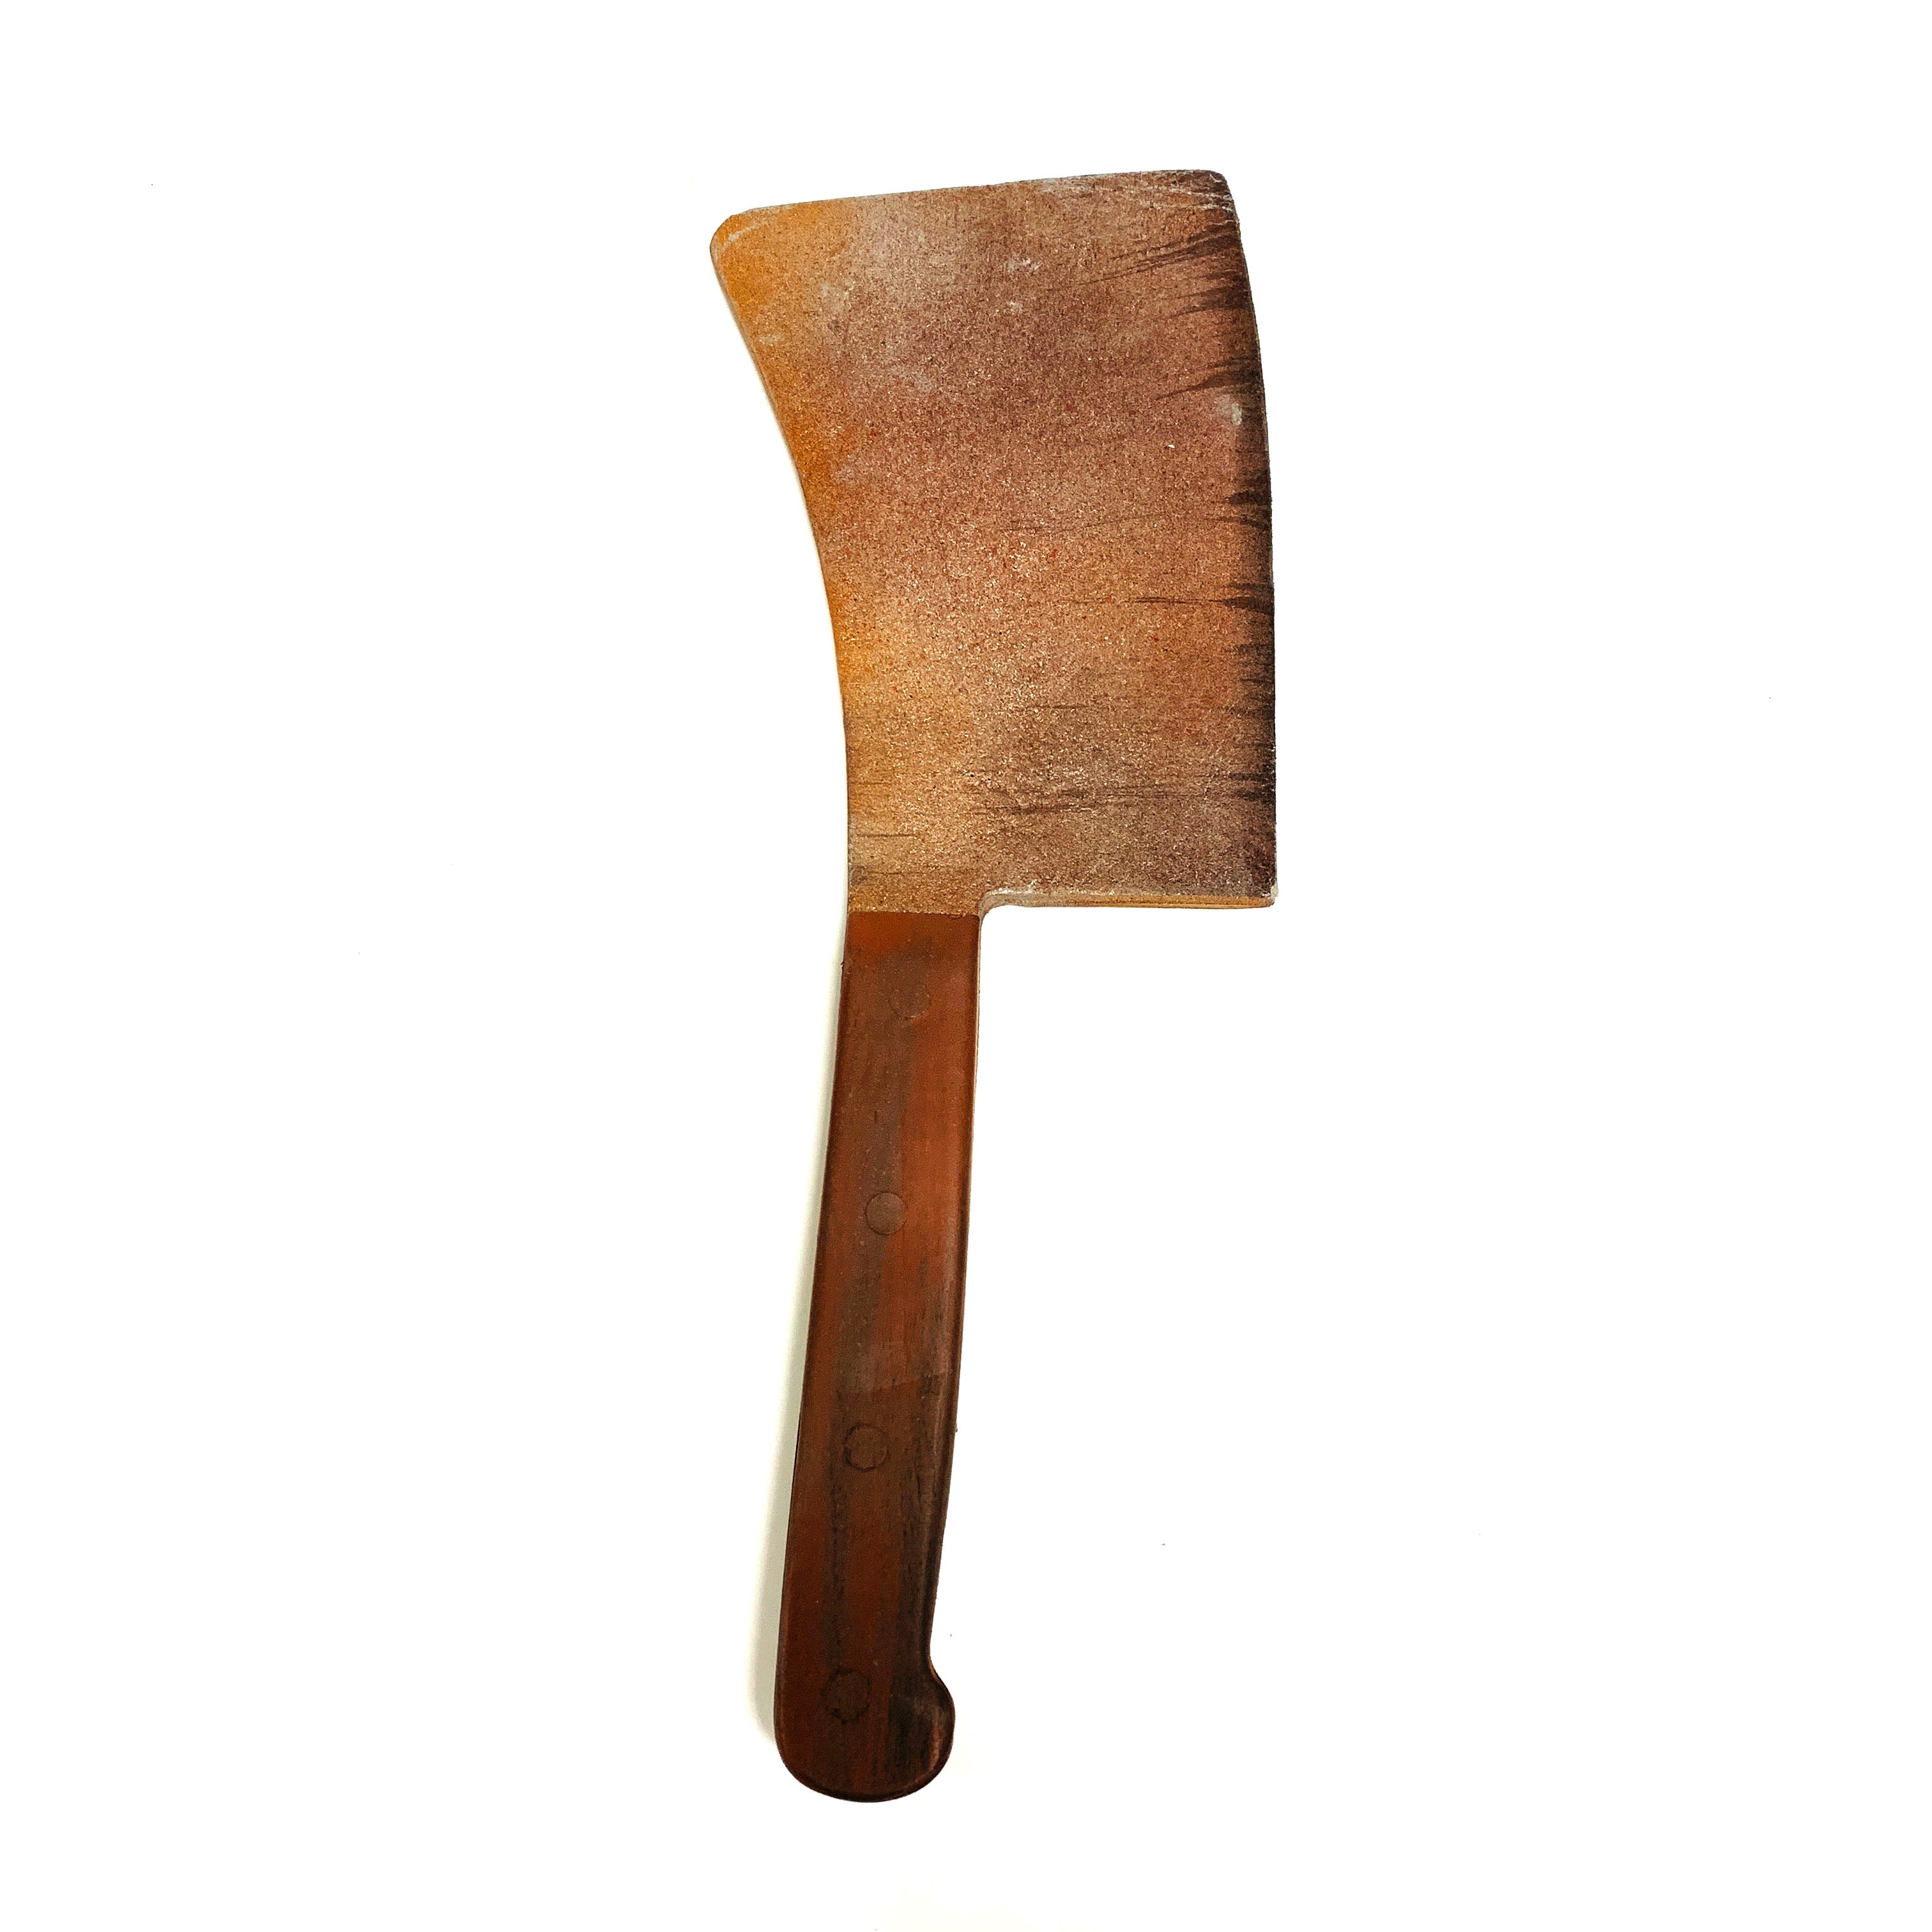 Extra Large Foam Rubber Butcher's Cleaver - RUSTY - Rusty Blade with Brown Handle